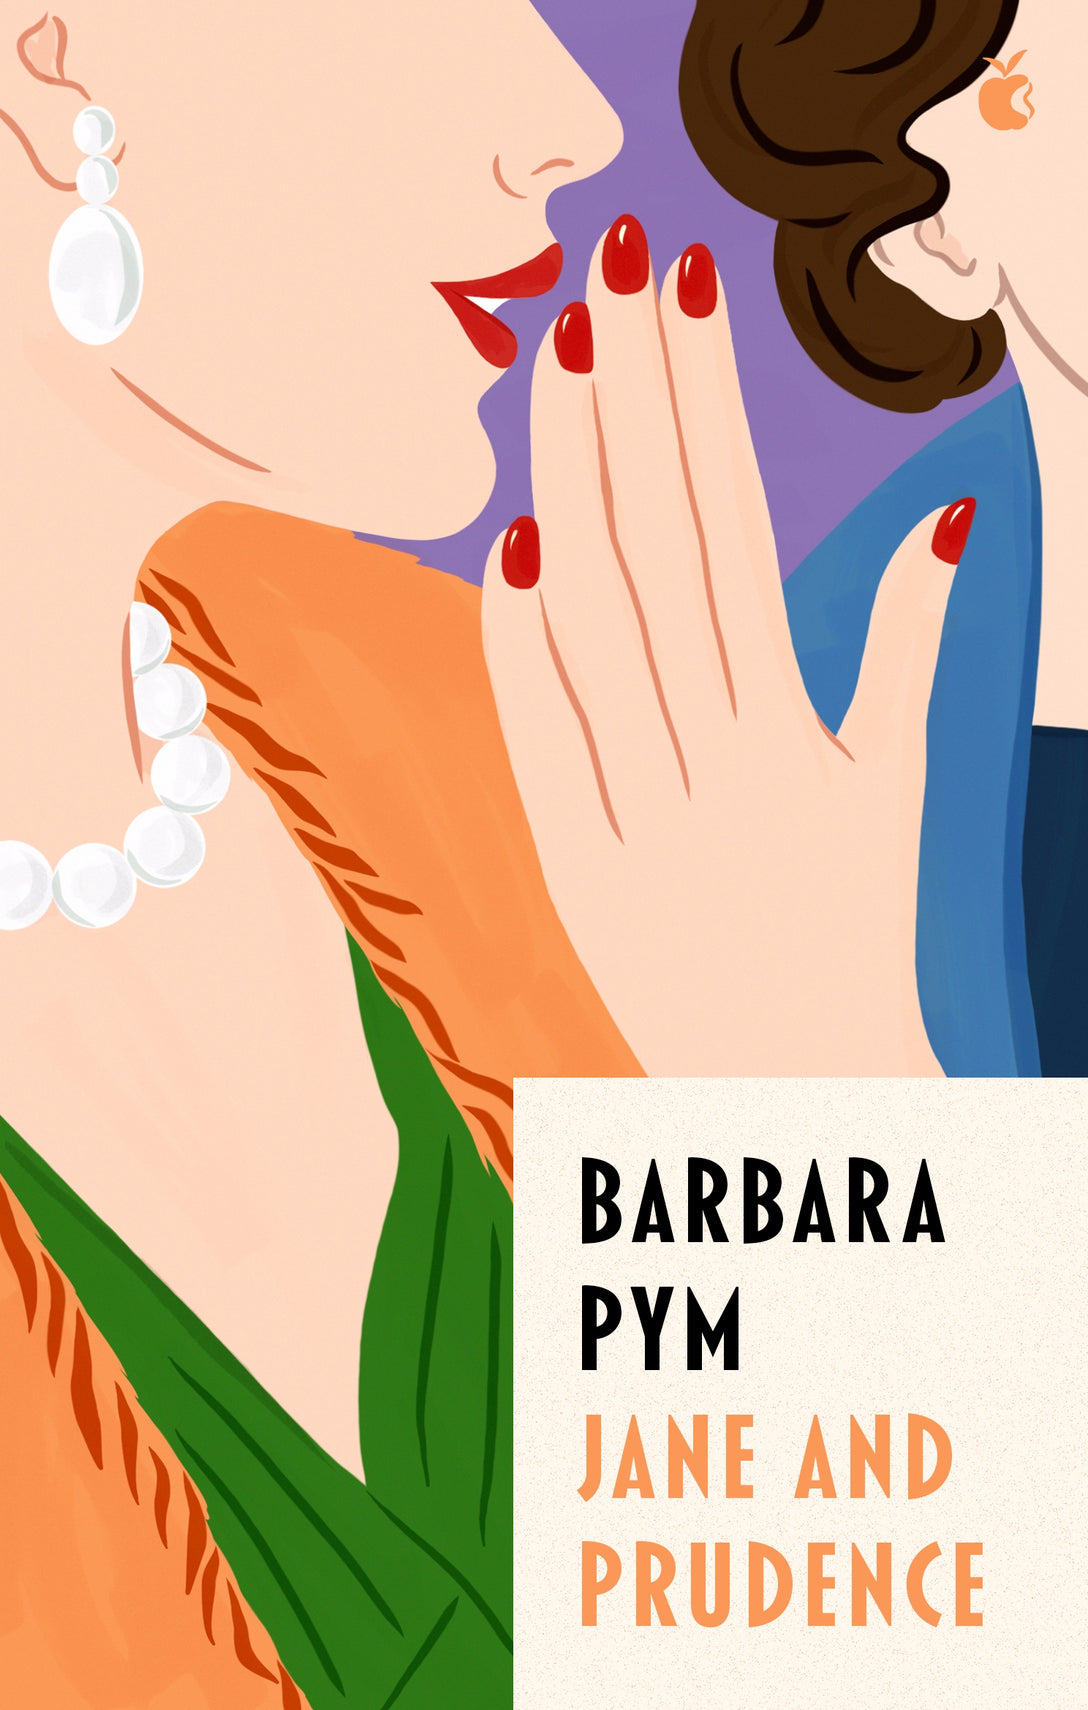 Jane And Prudence by Barbara Pym